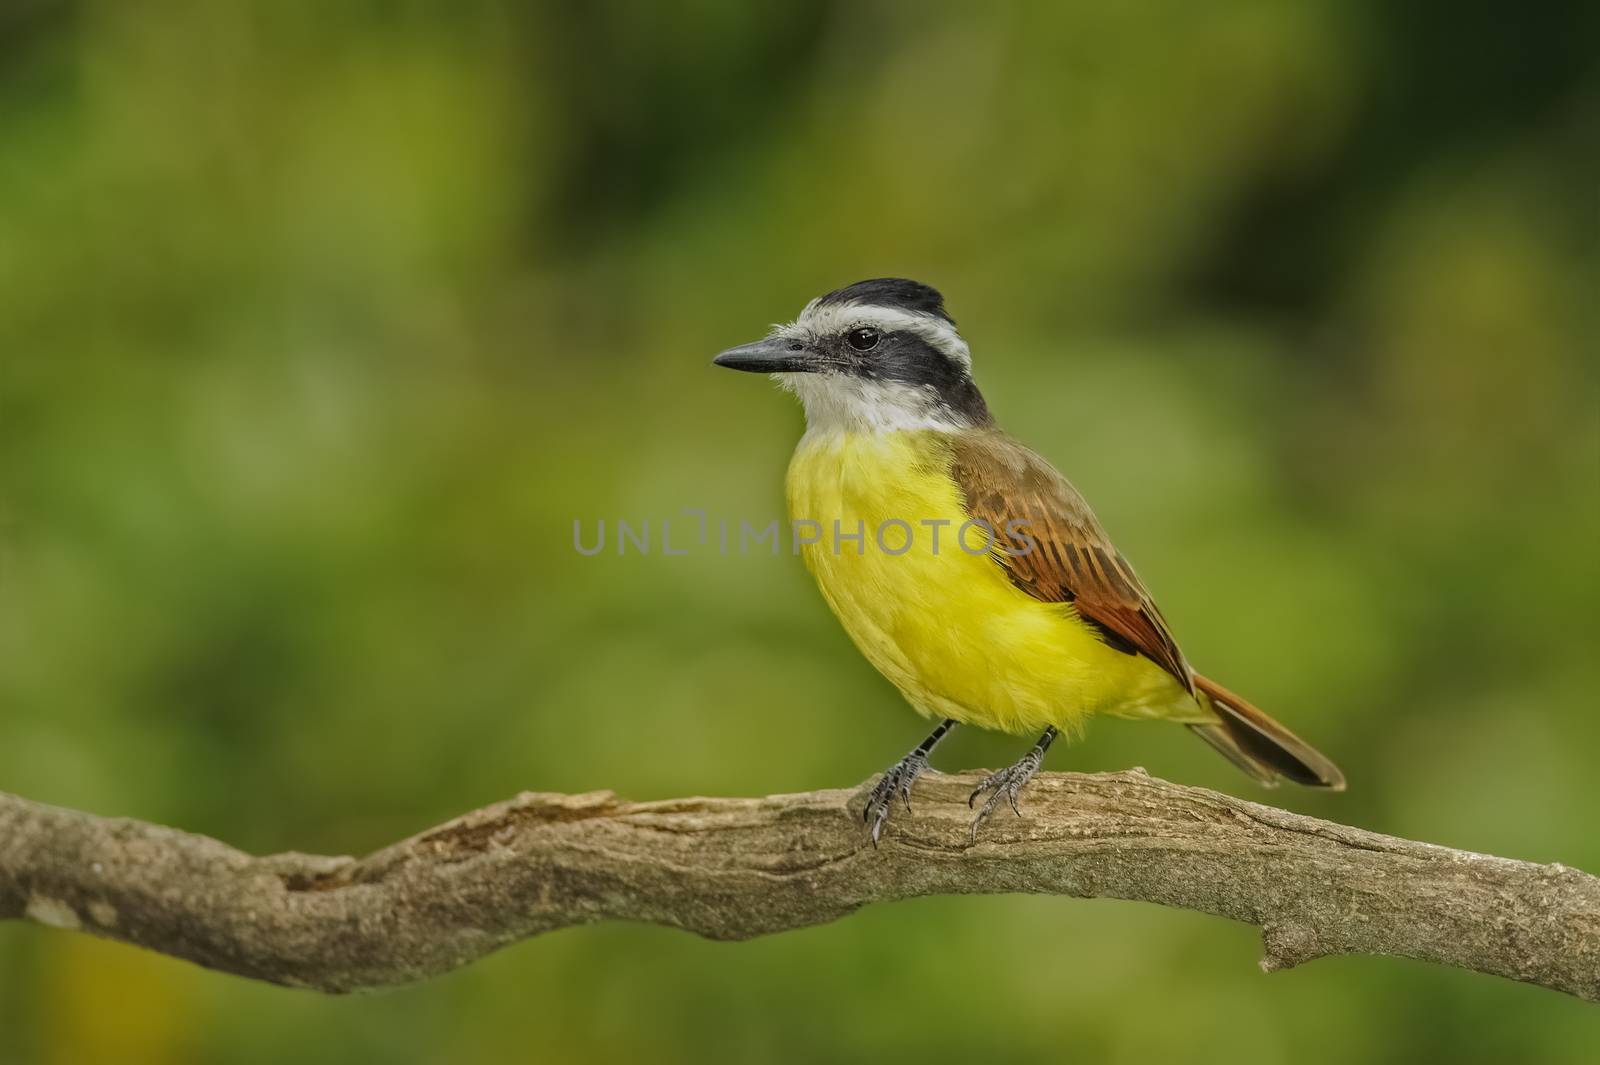 Great Kiskadee perched on a branch in Costa Rica.